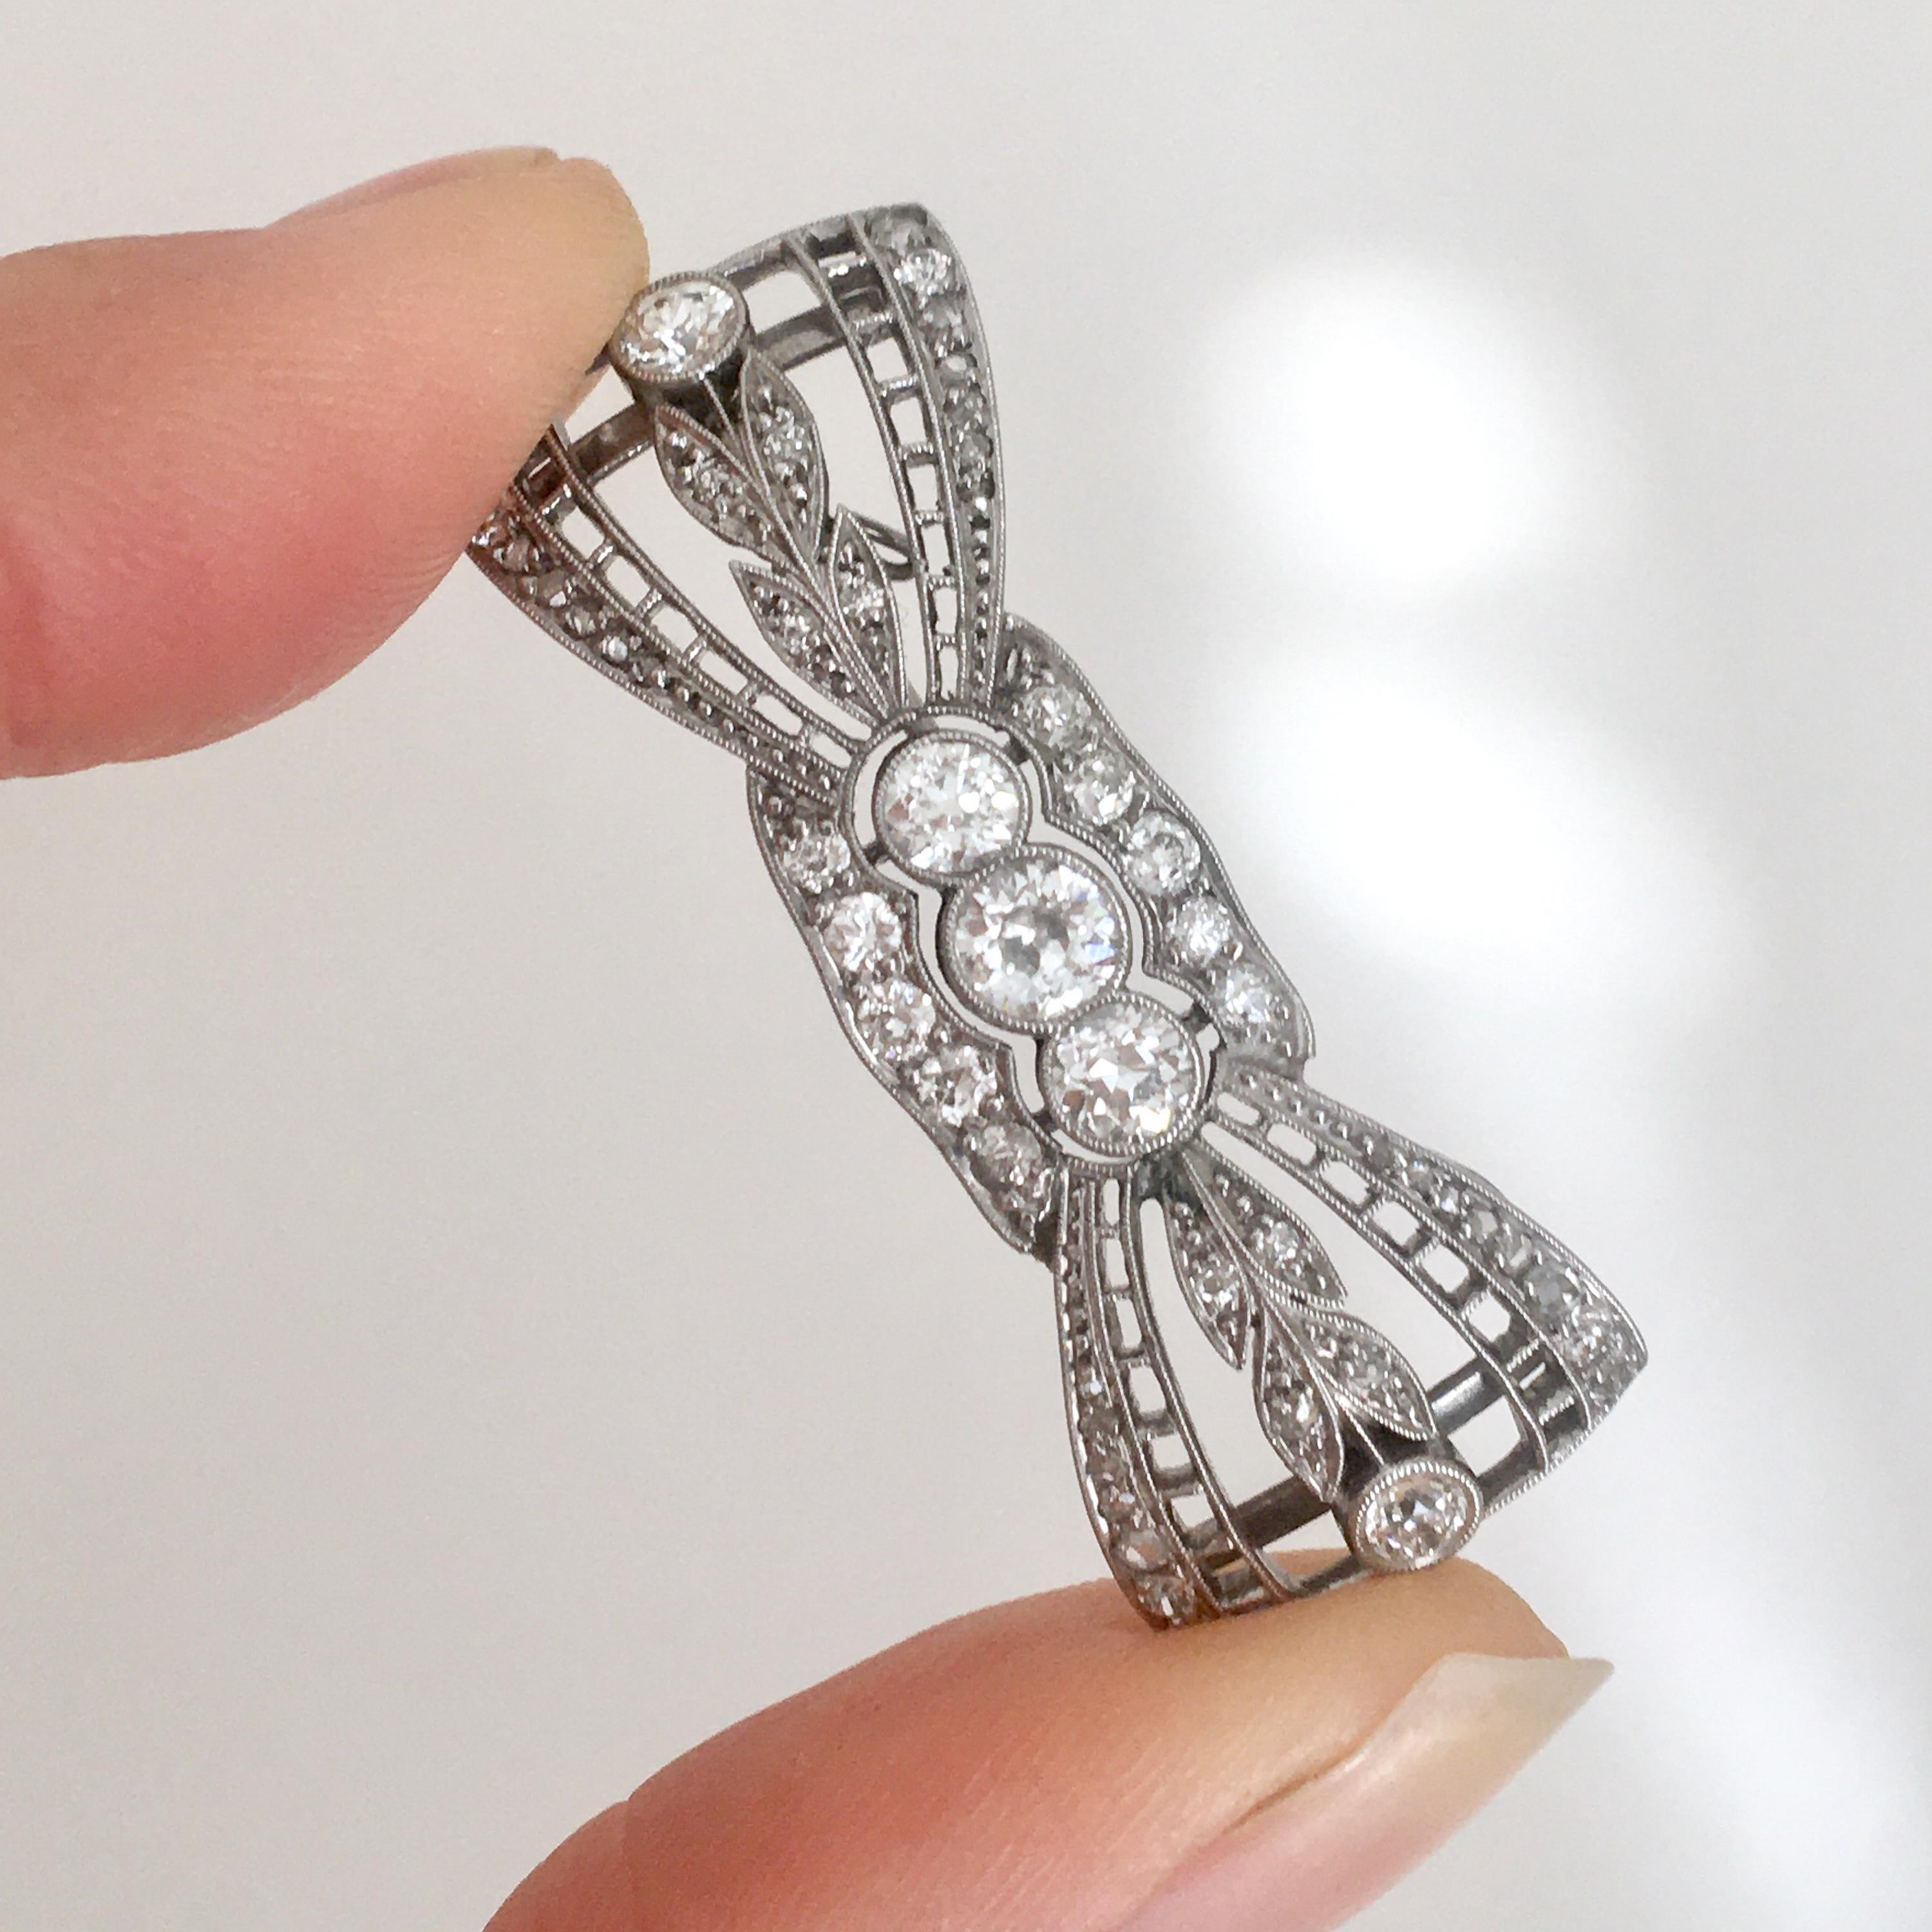 A magnificent Art Deco bow brooch made of platinum and many diamonds. The brooch dates from the 1930s and has a beautiful openwork and leave design which is set with old cut diamonds. The diamonds displaying a fine white color, brilliance and